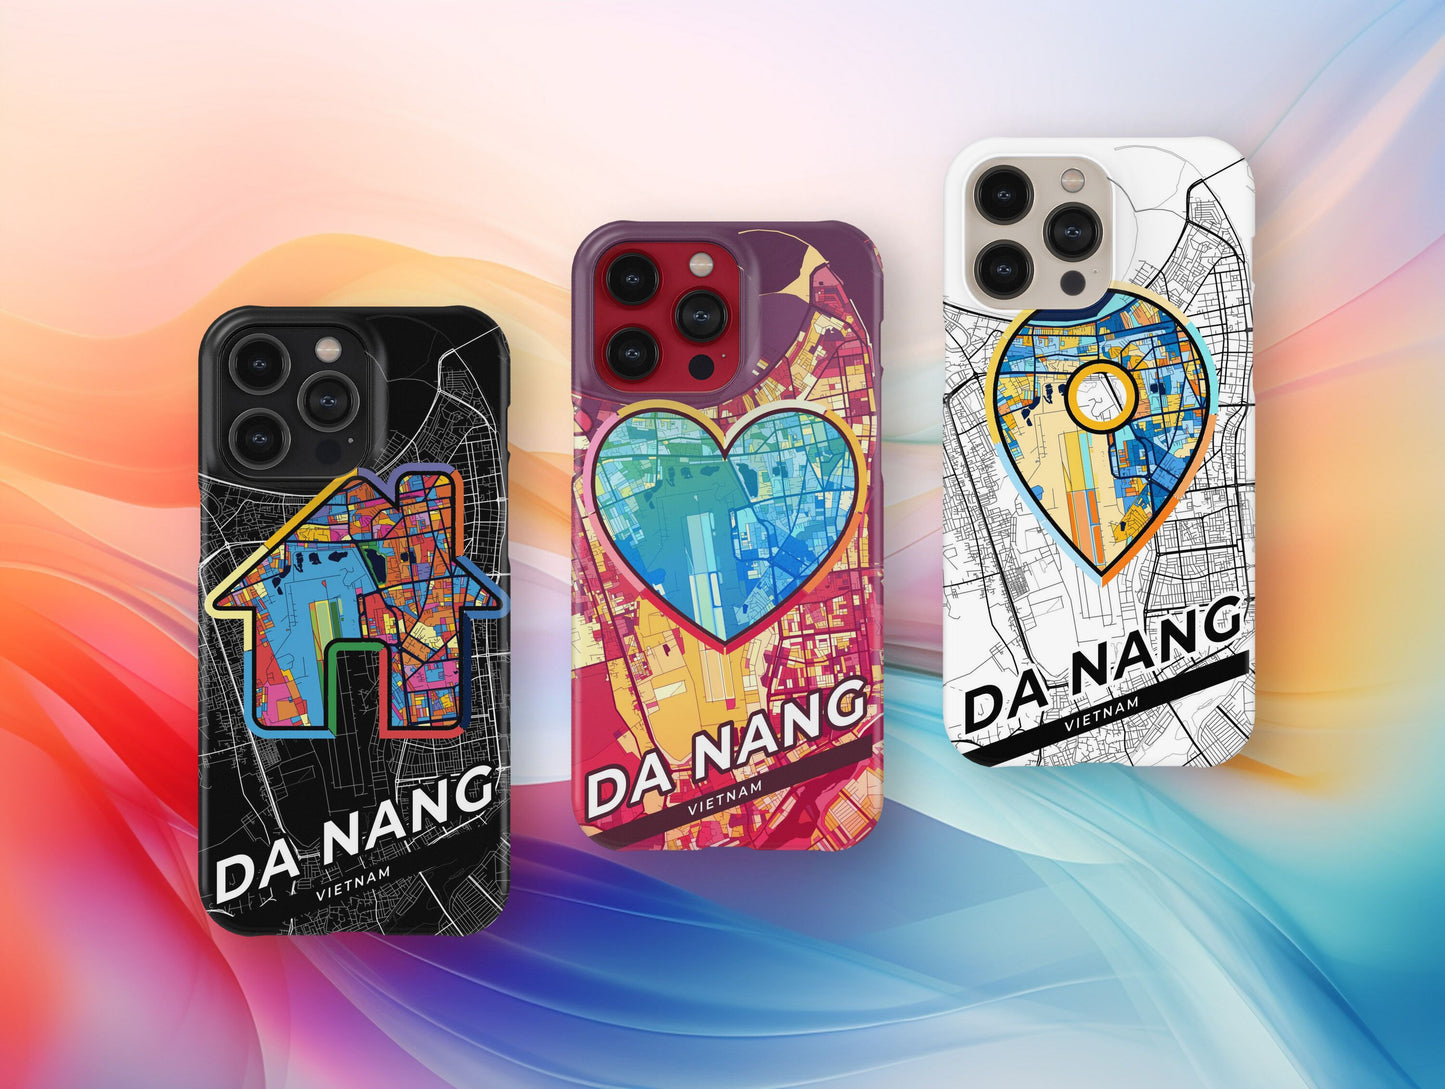 Da Nang Vietnam slim phone case with colorful icon. Birthday, wedding or housewarming gift. Couple match cases.